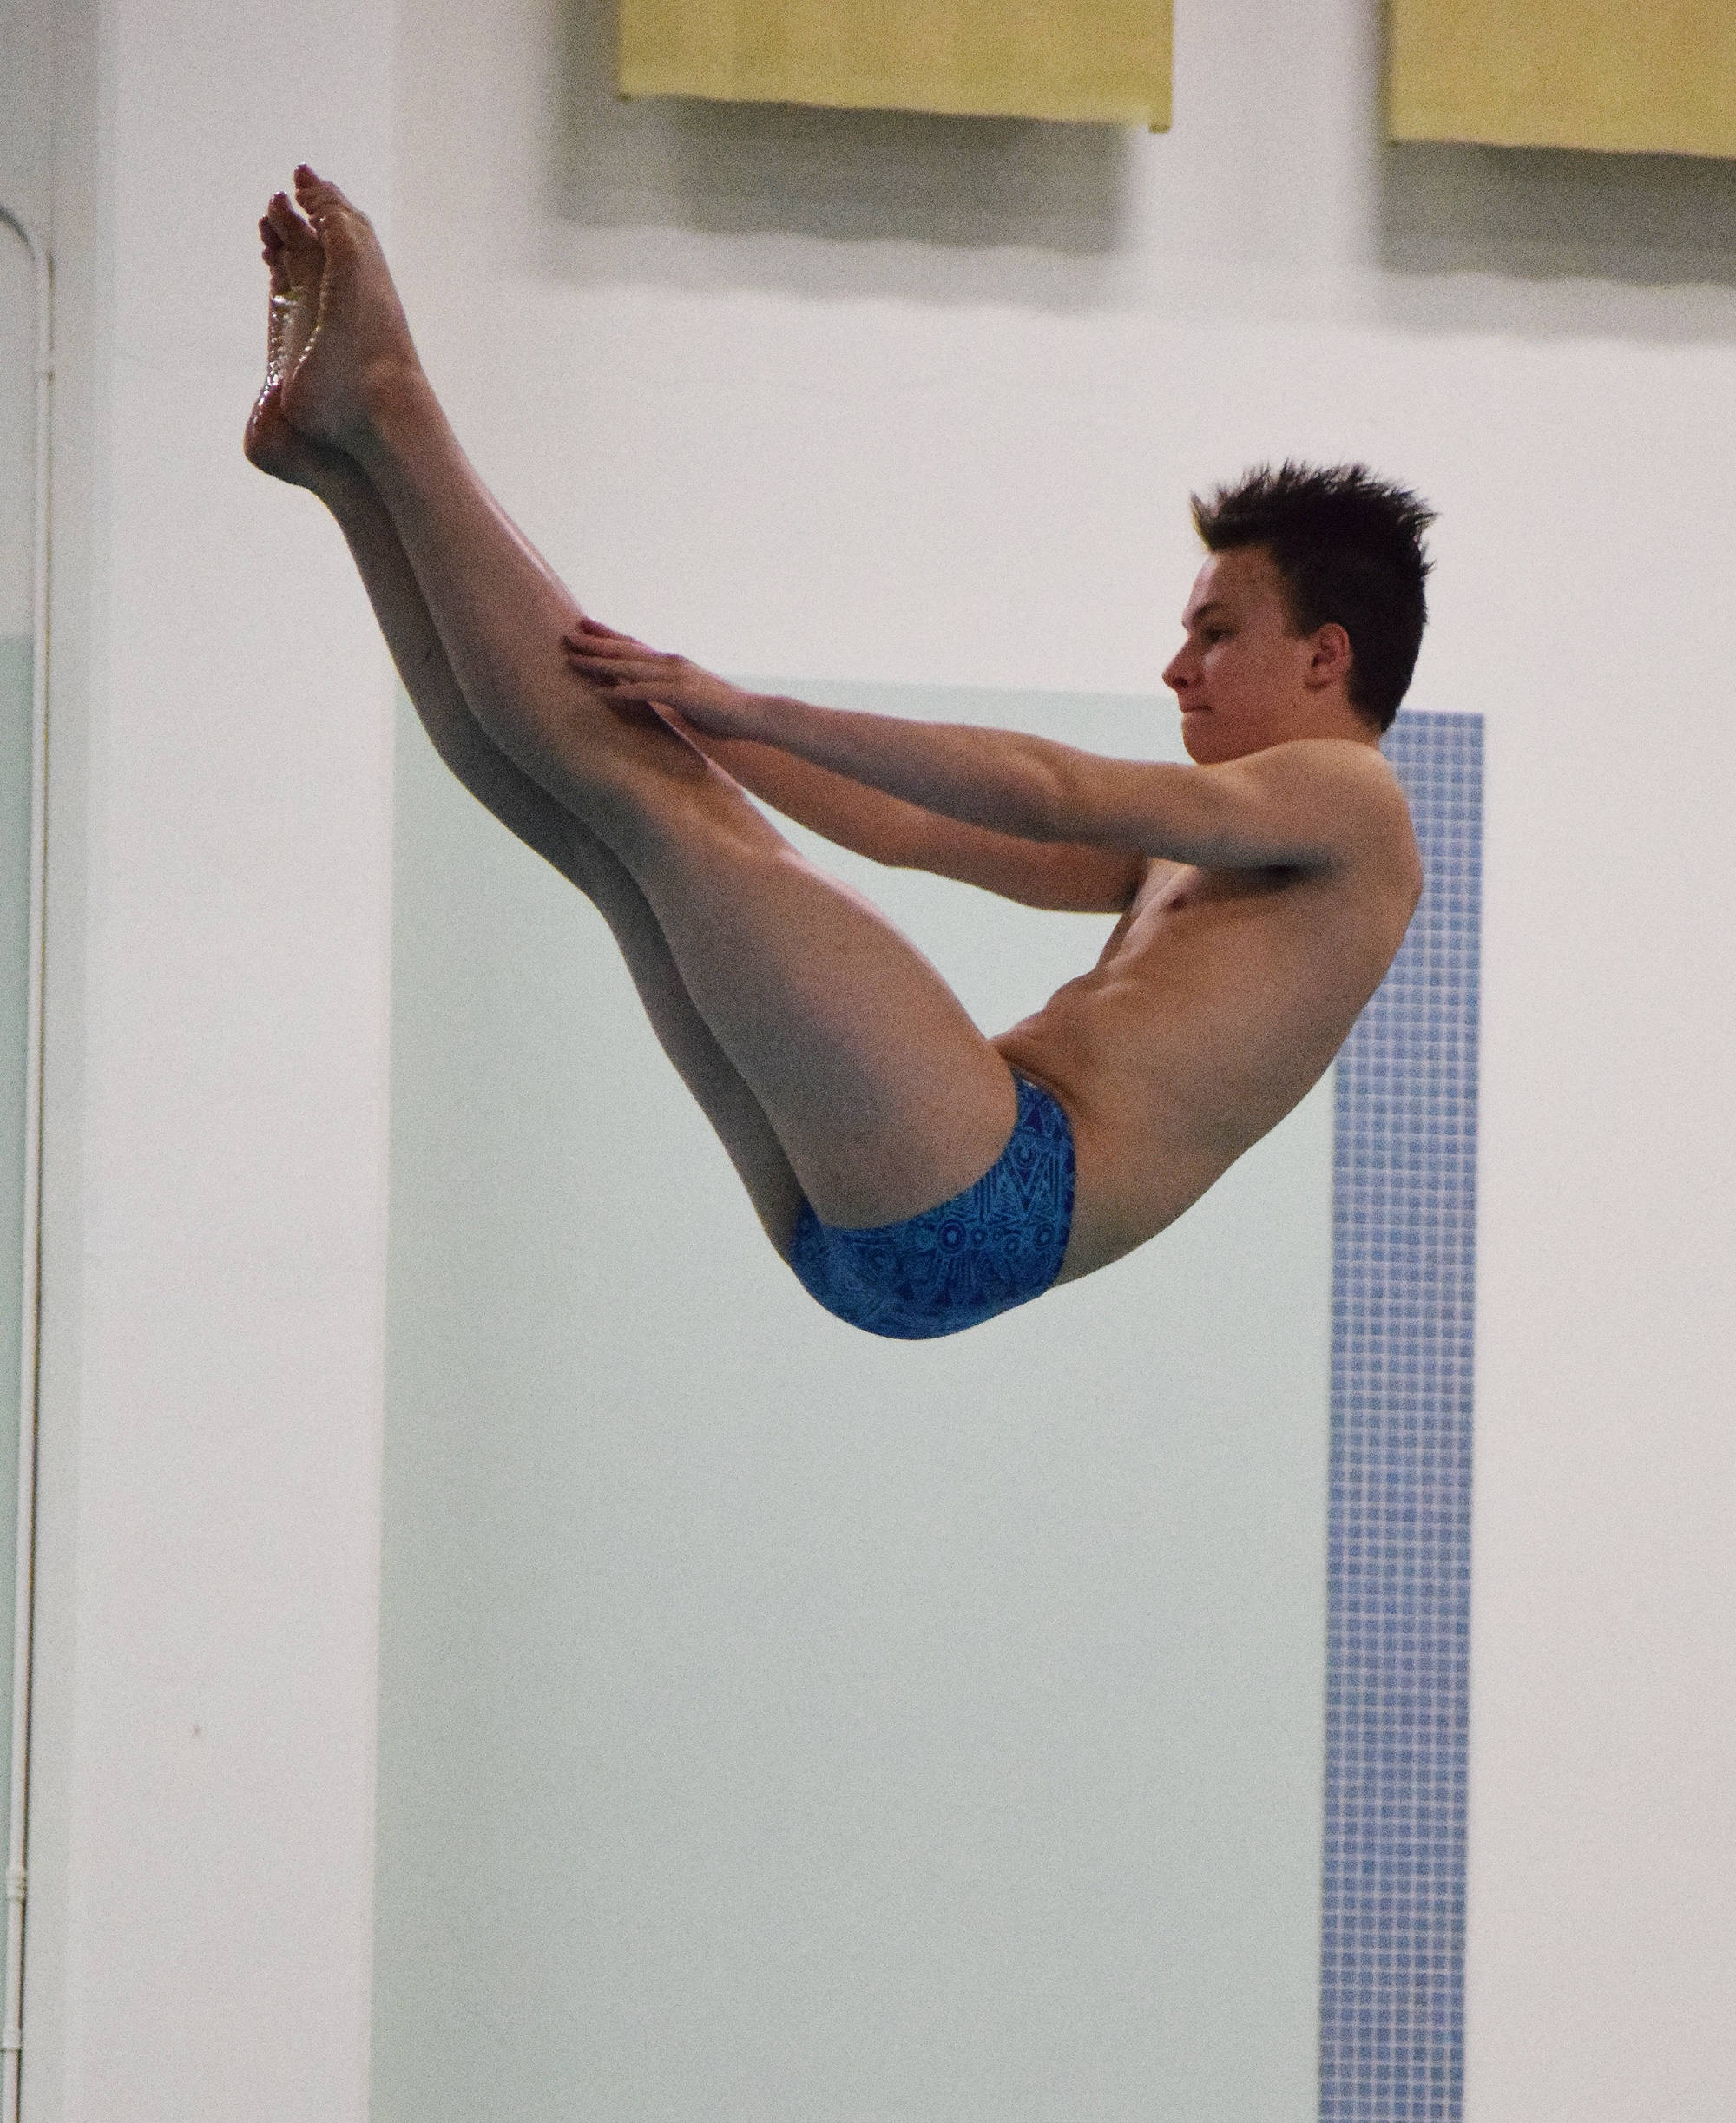 Soldotna’s Kylin Welch pulls off a move in the boys 1-meter diving event Saturday at the ASAA First National Bank State Swimming & Diving Championships at the Bartlett High pool. (Photo by Joey Klecka/Peninsula Clarion)